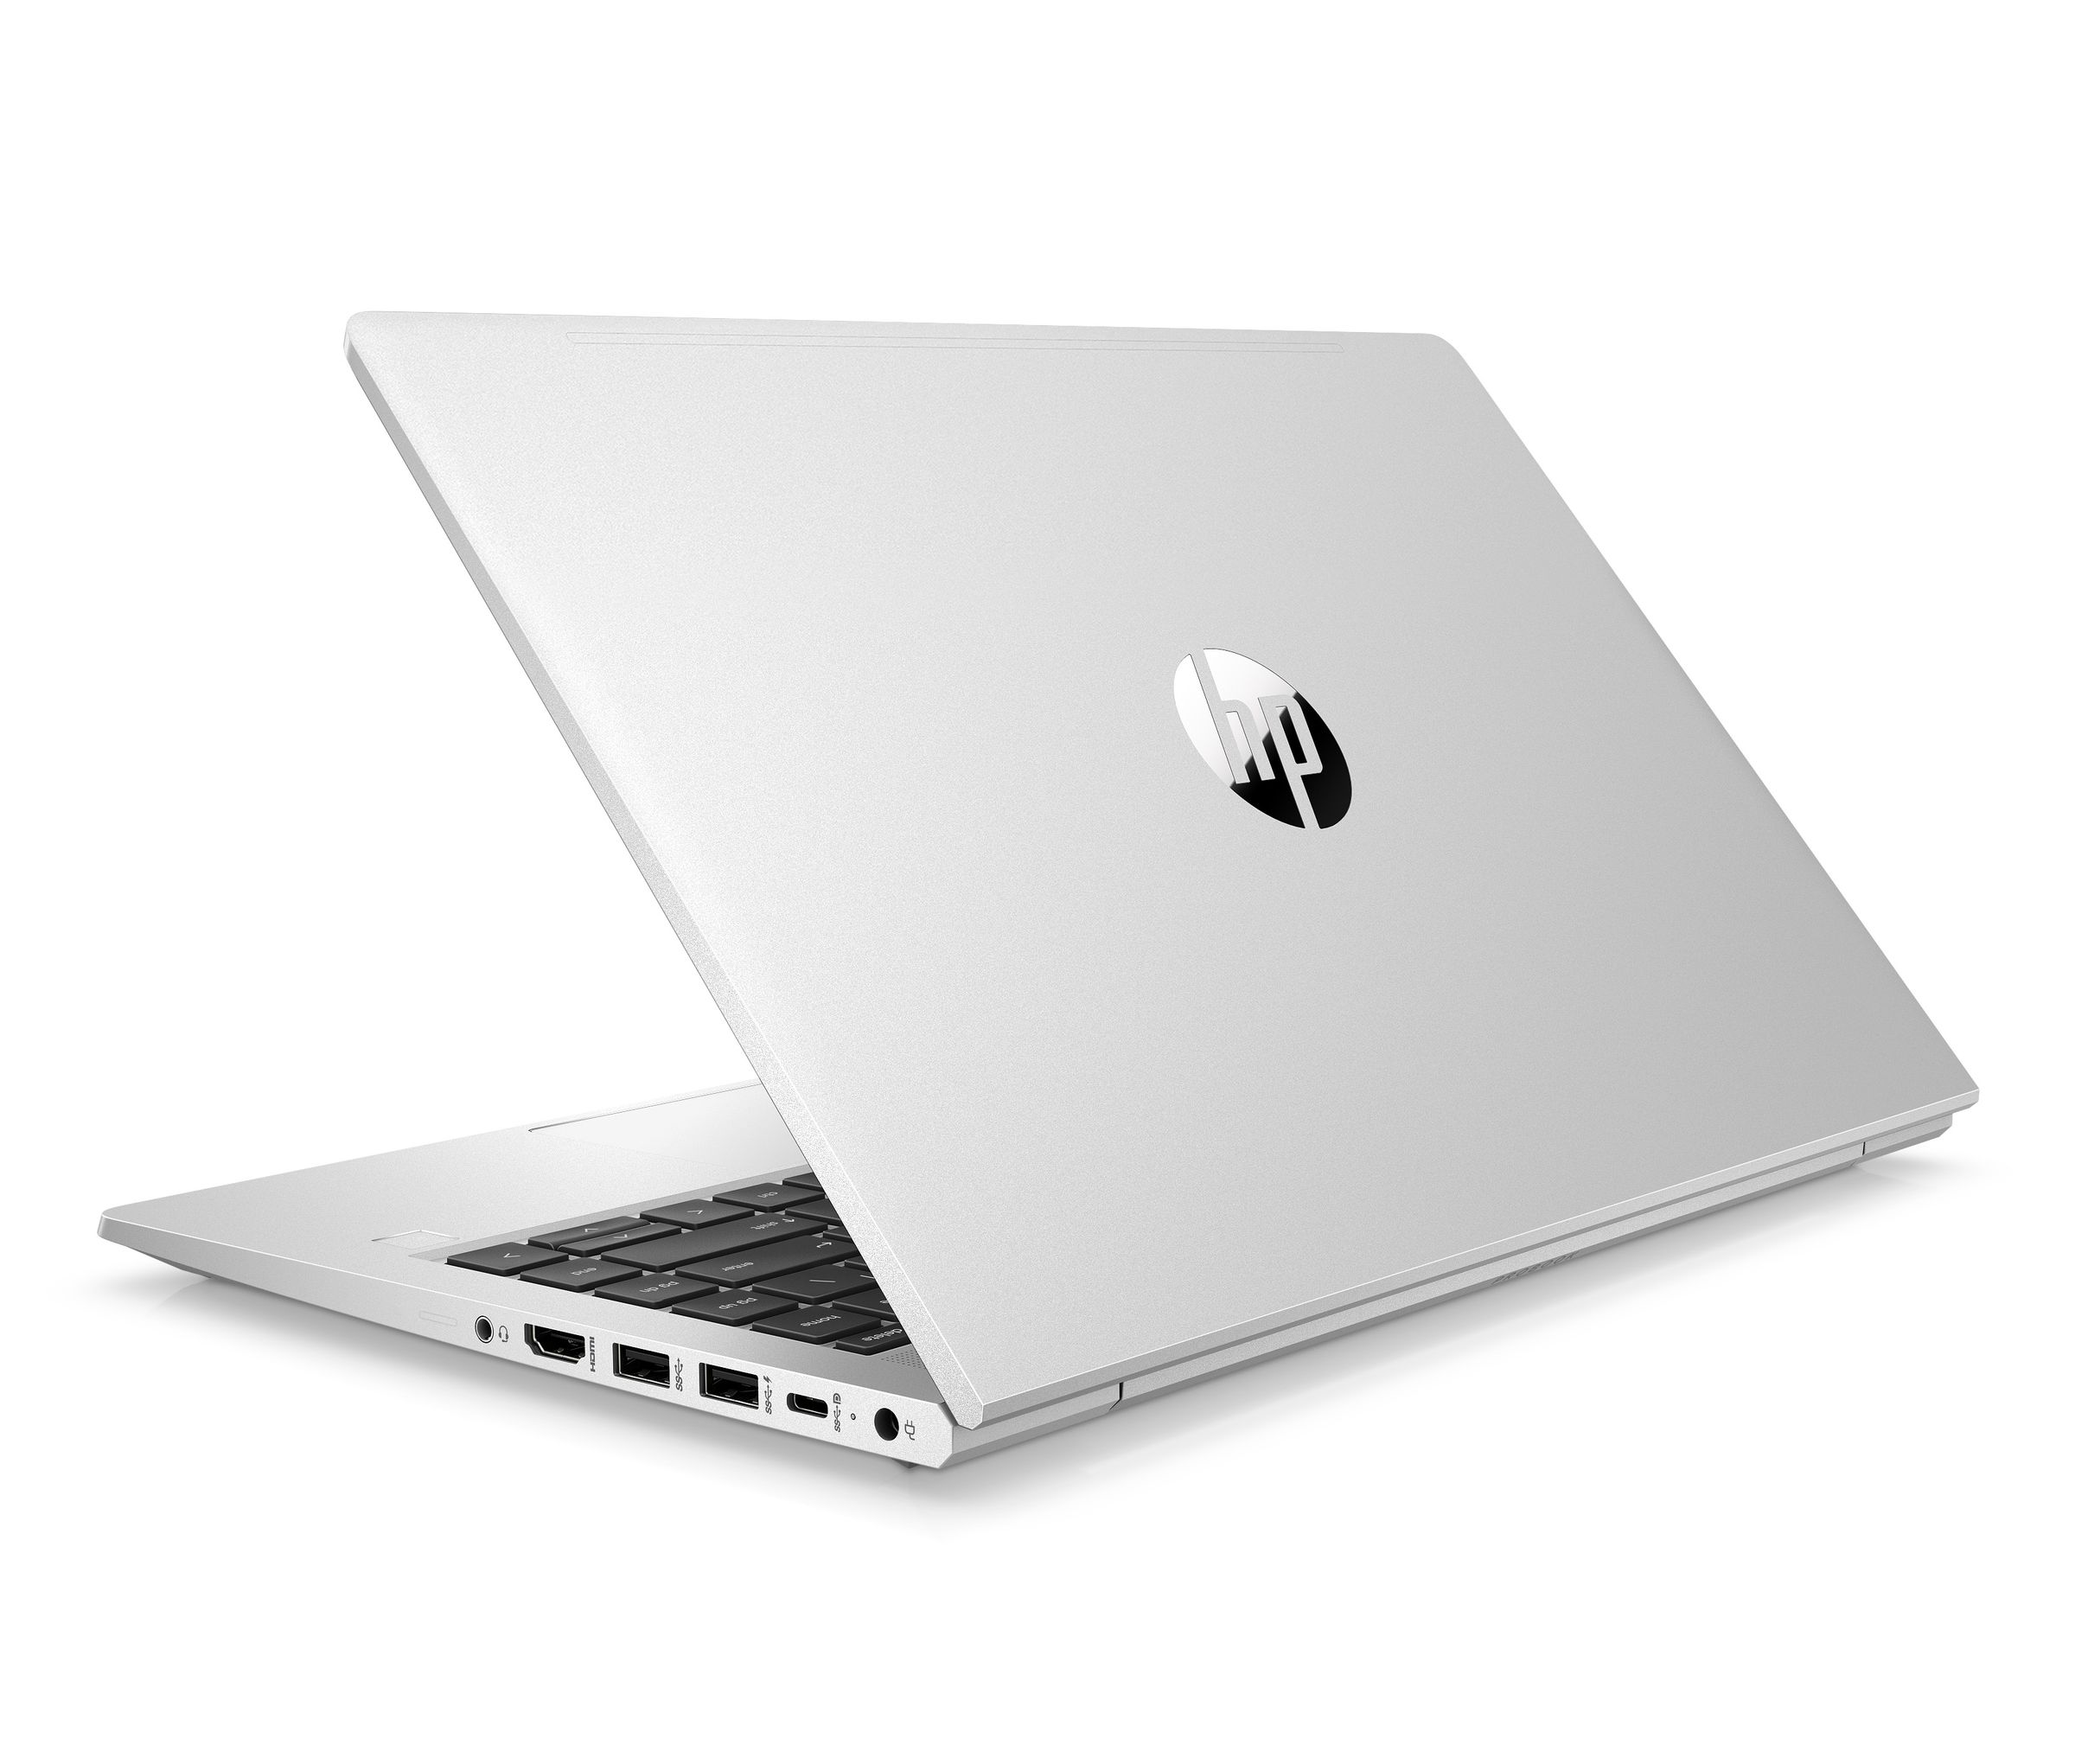 The Intel ProBook 440 G9 laptop comes with either an Intel Integrated graphics chip or Nvidia GeForce MX570.